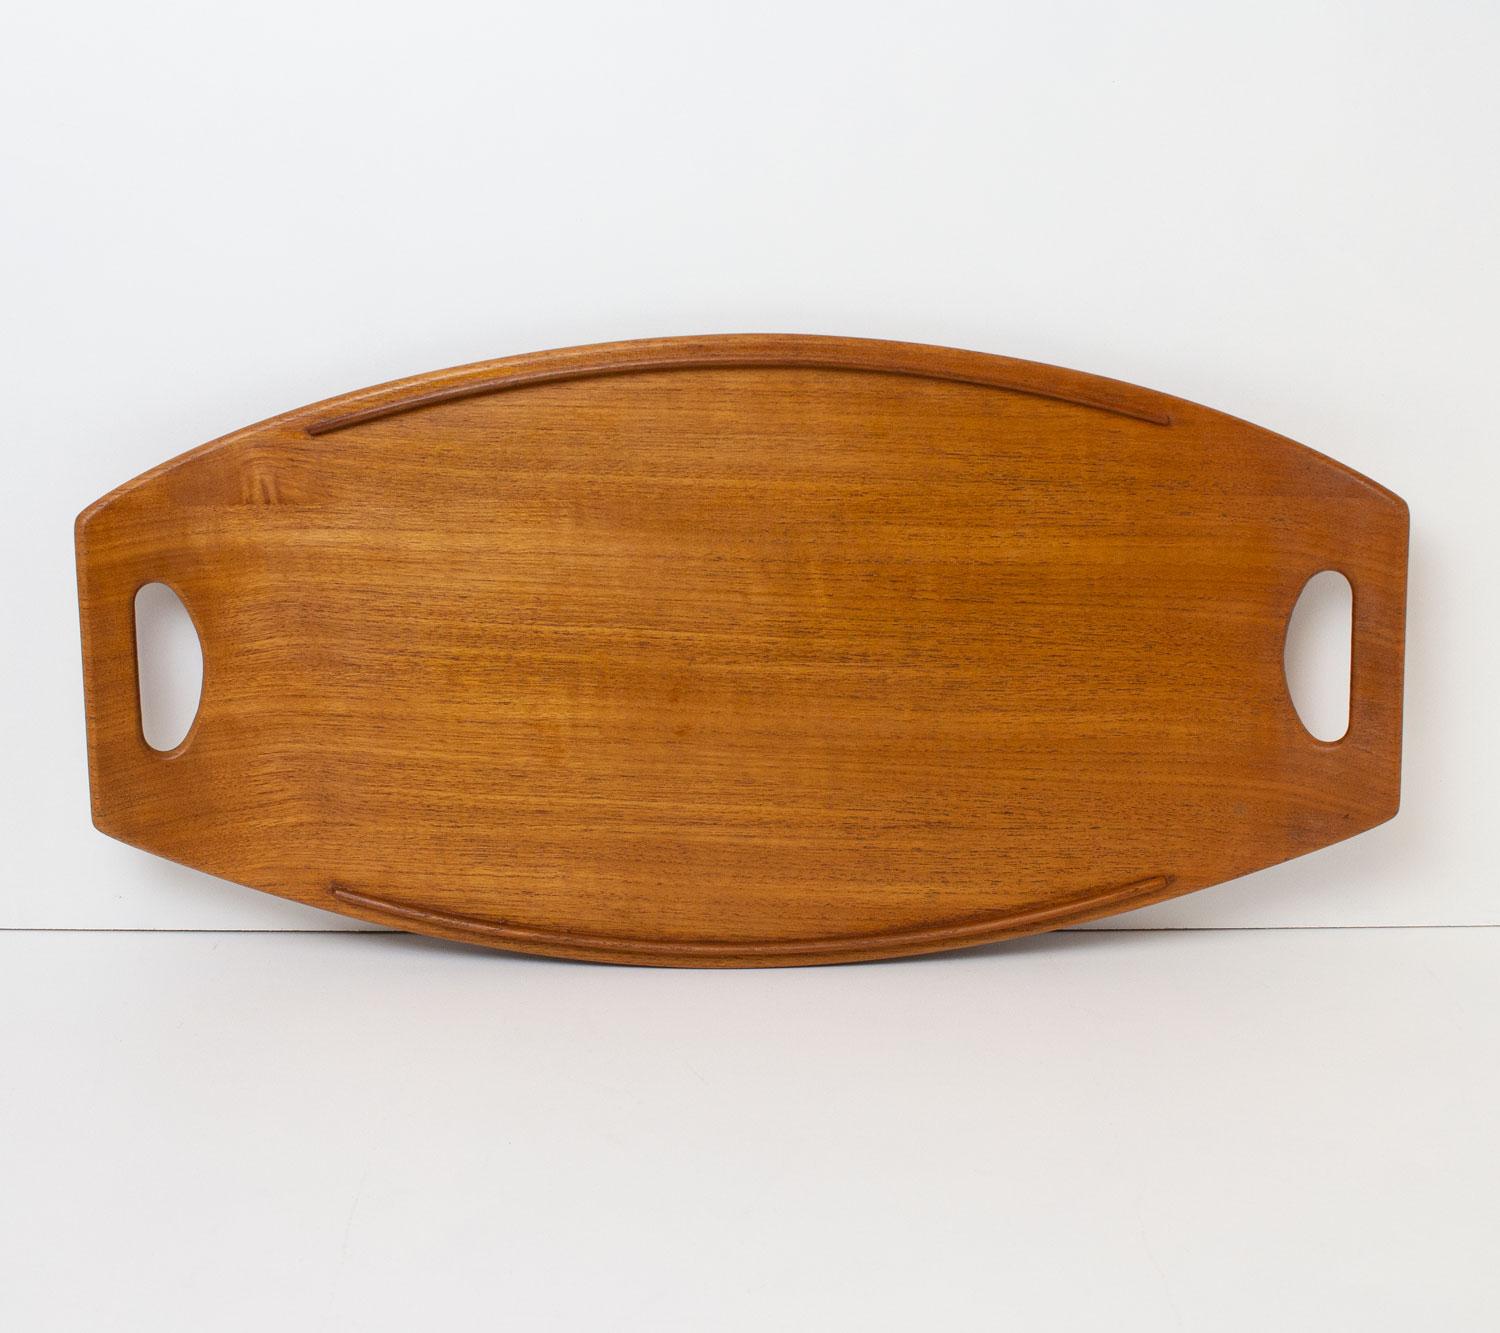 Danish teak tray by Jens Quistgaard, the renowned Danish sculptor and industrial designer who worked prolifically for the American company Dansk Designs in the 1950s and 1960s. His work is in the collections of many museums today including the V&A